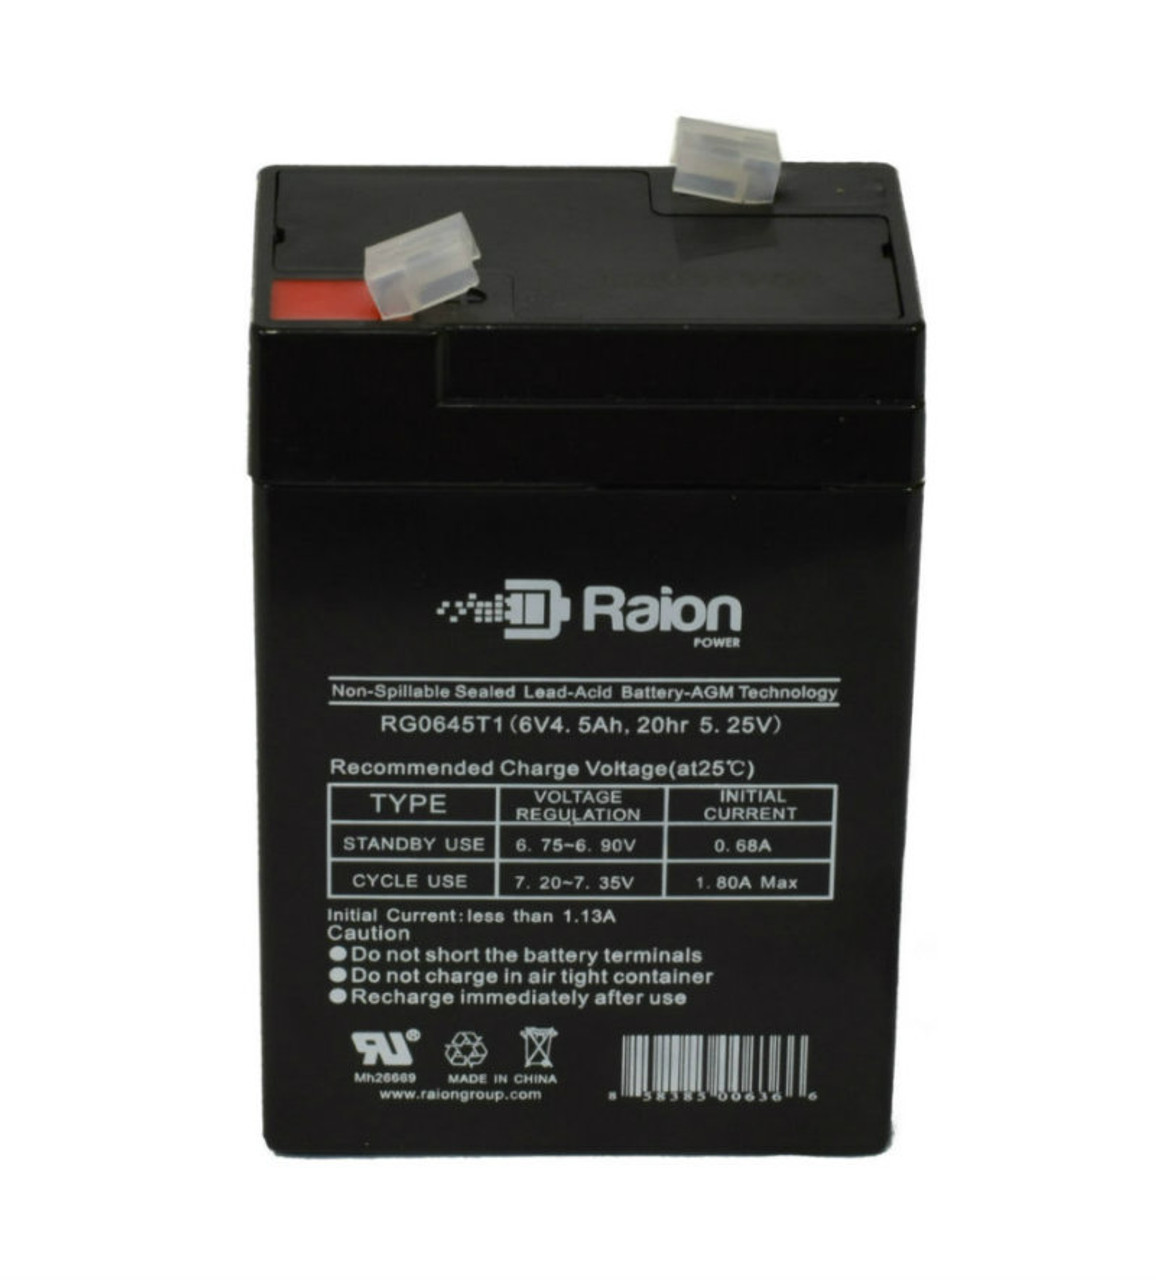 Raion Power RG0645T1 Replacement Battery Cartridge for Delta HR 6-4.5